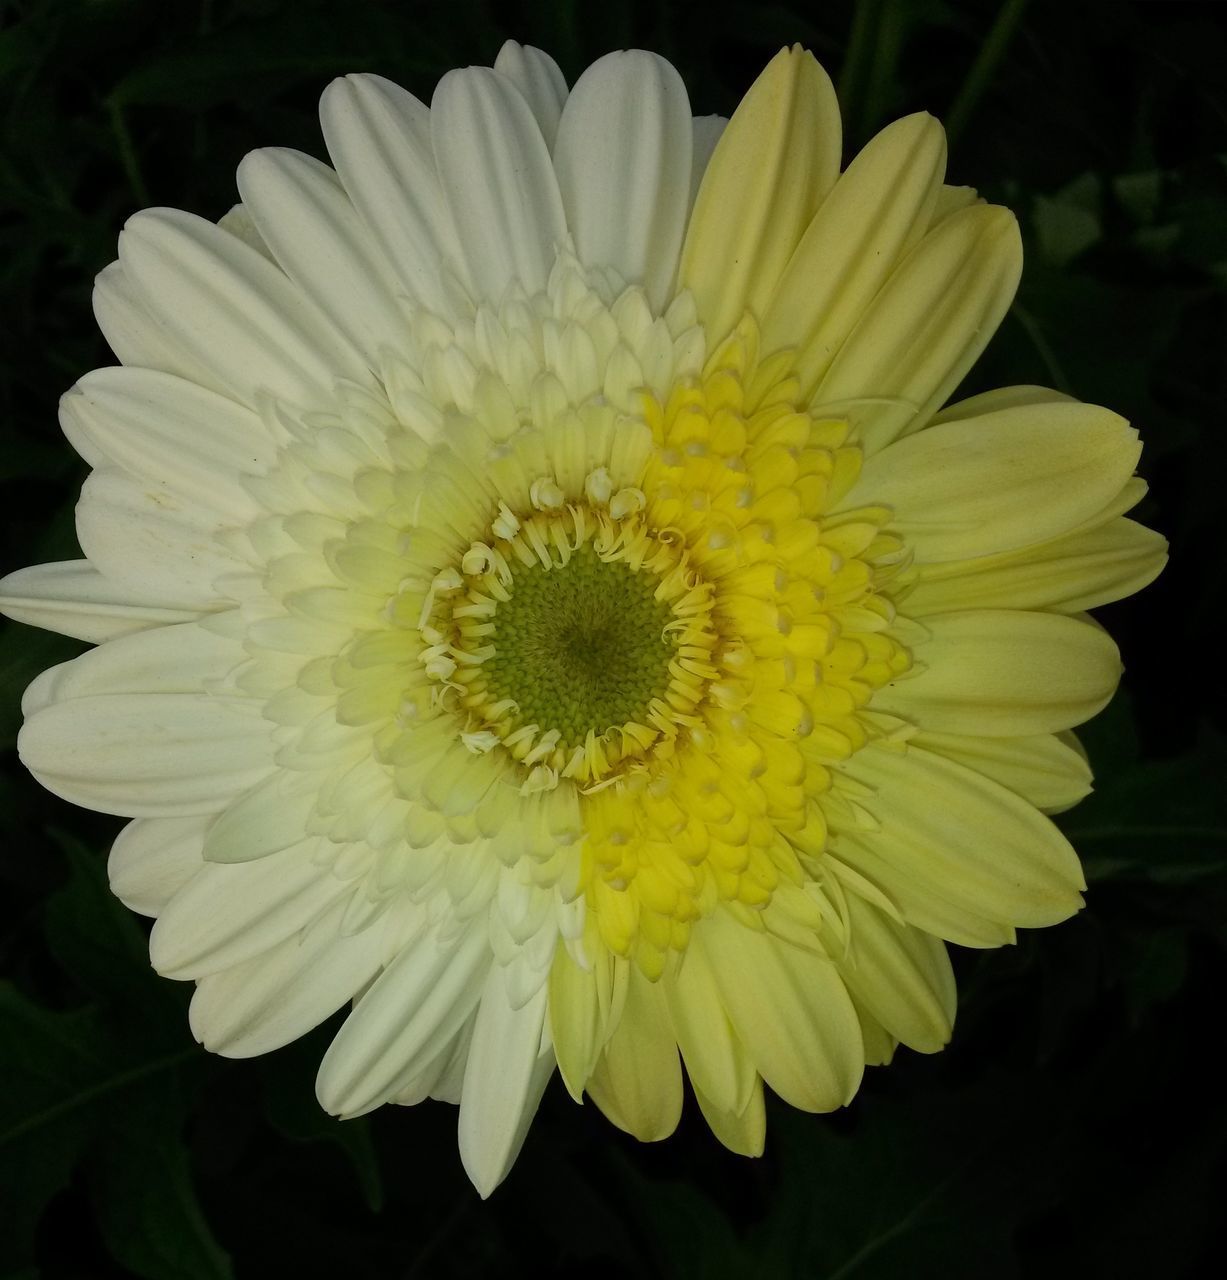 CLOSE-UP OF WHITE FLOWER WITH YELLOW PETALS